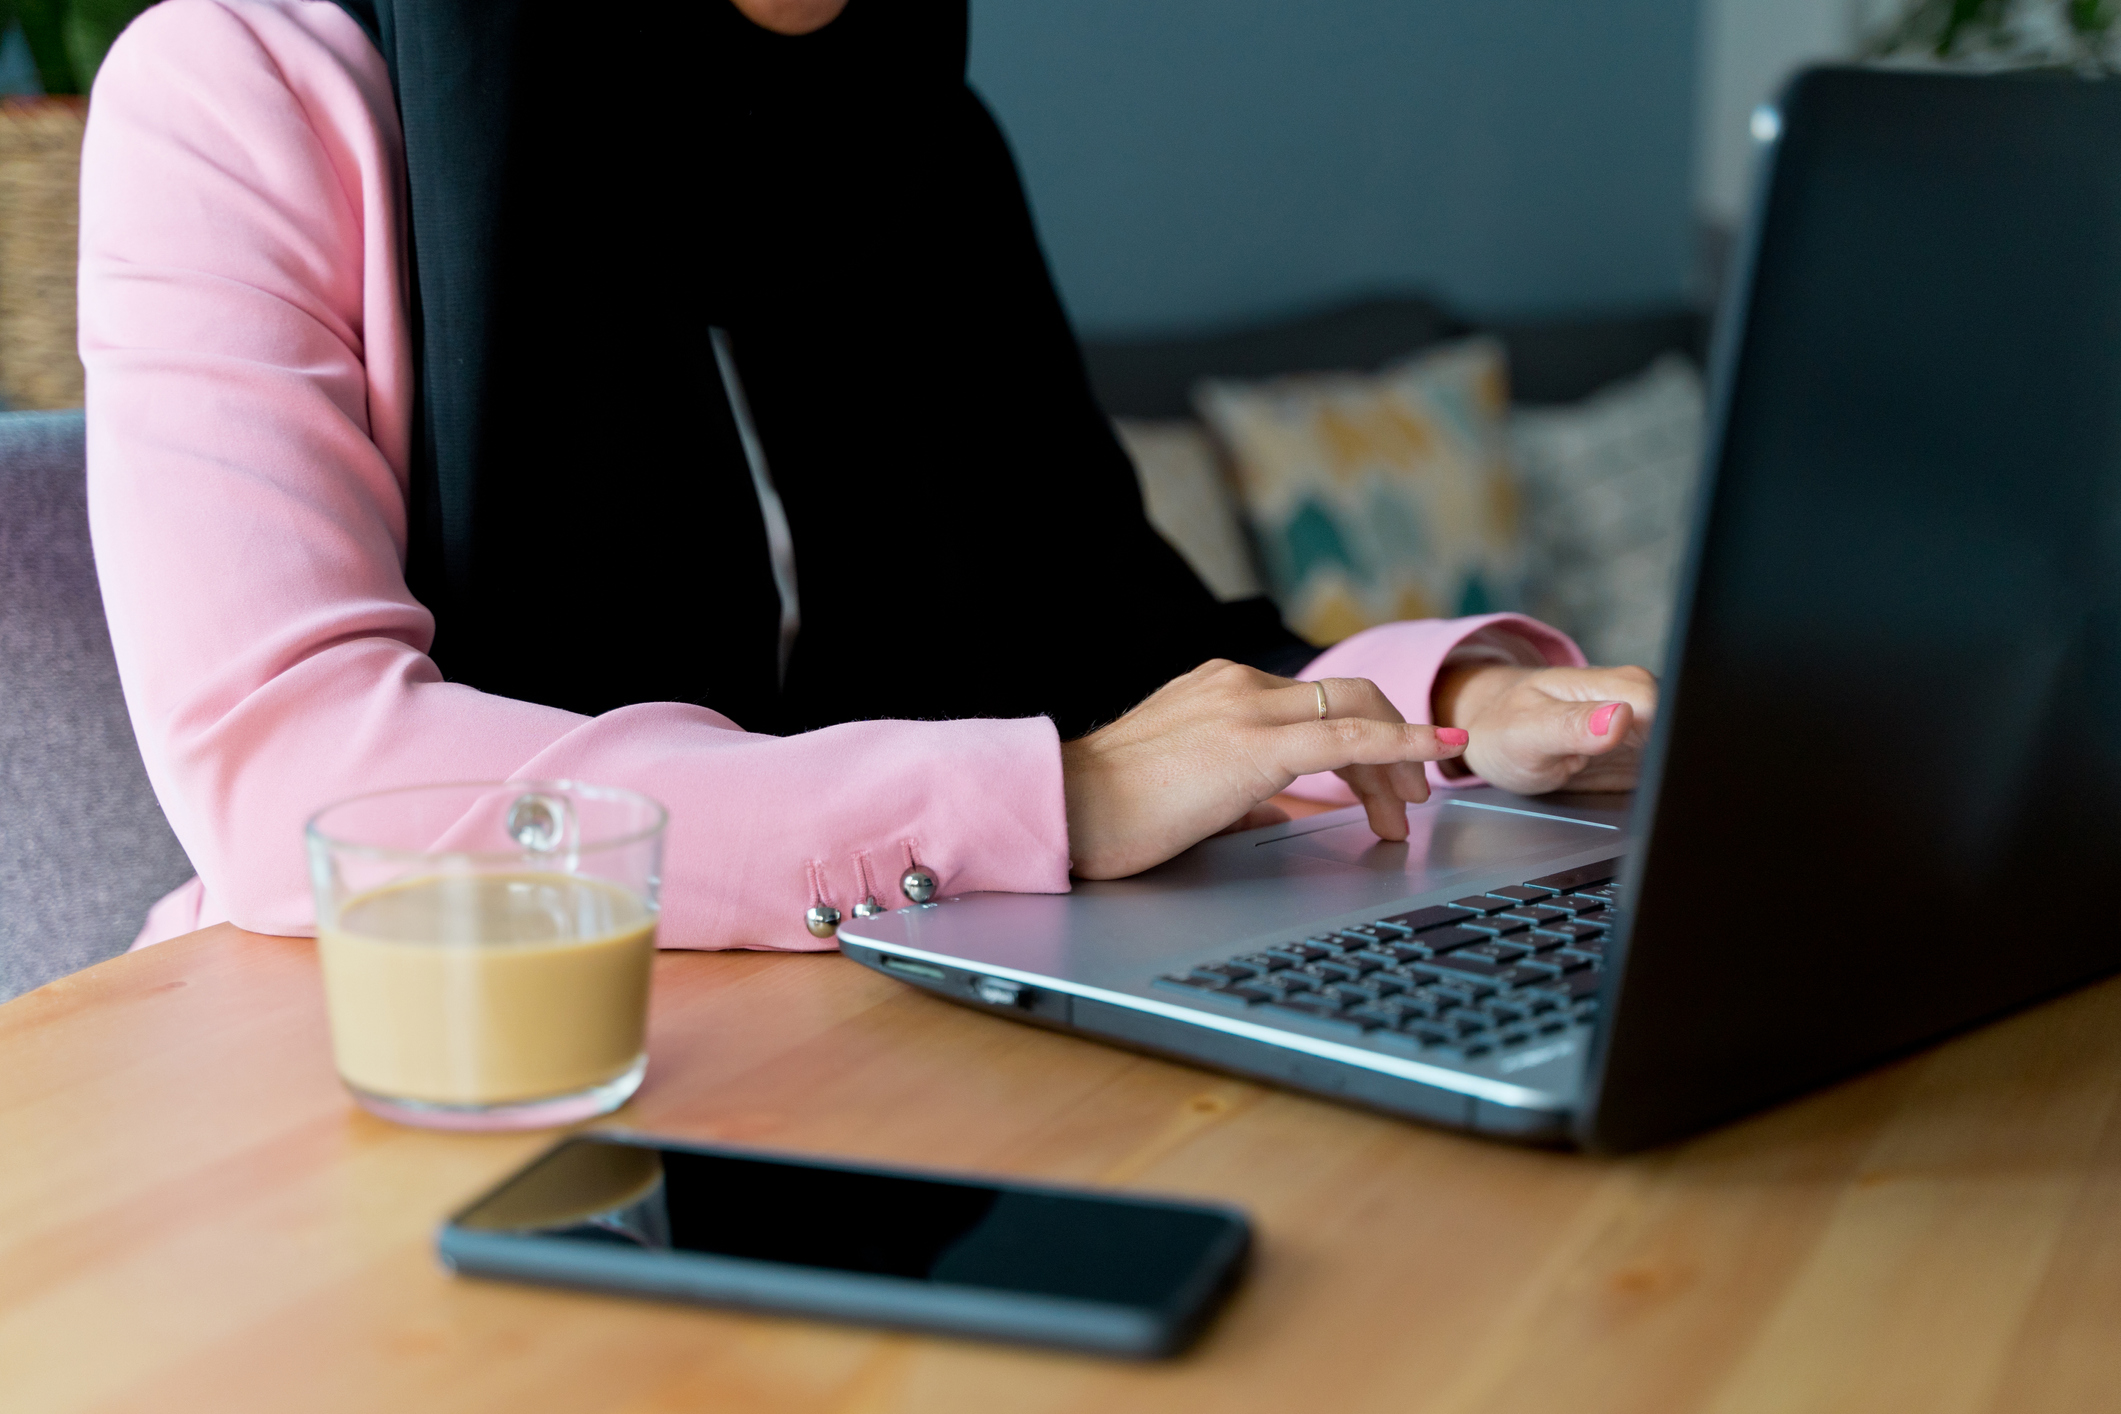 Photograph of person on laptop. The photo is cropped so you cannot see their face. There is a cup of coffee and phone on the table next to the laptop.